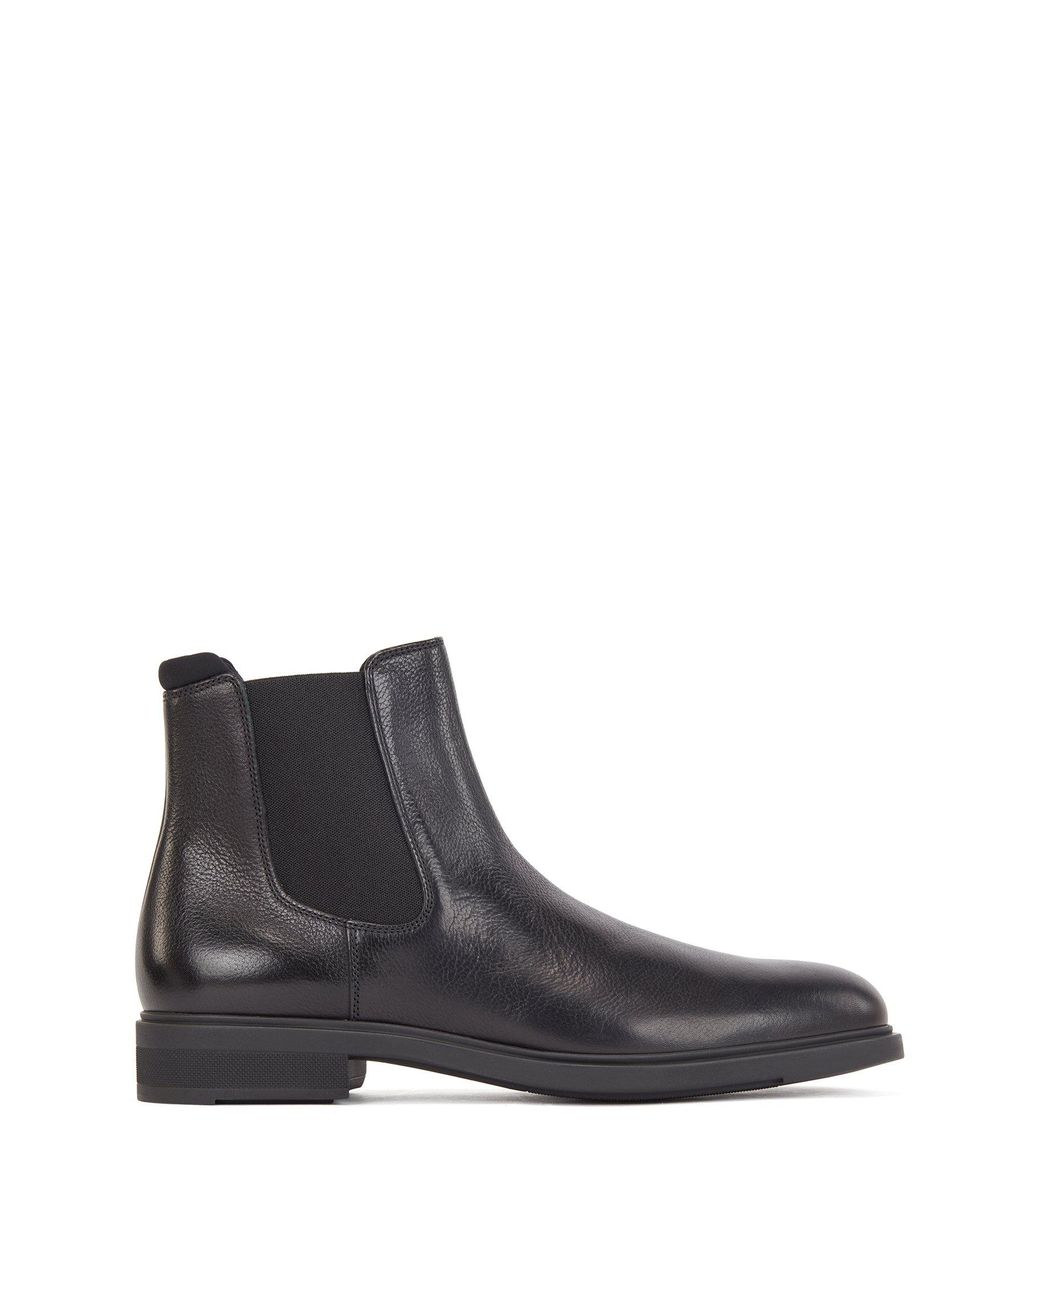 BOSS by Hugo Boss Italian Made Chelsea Boots In Leather With Monogram ...